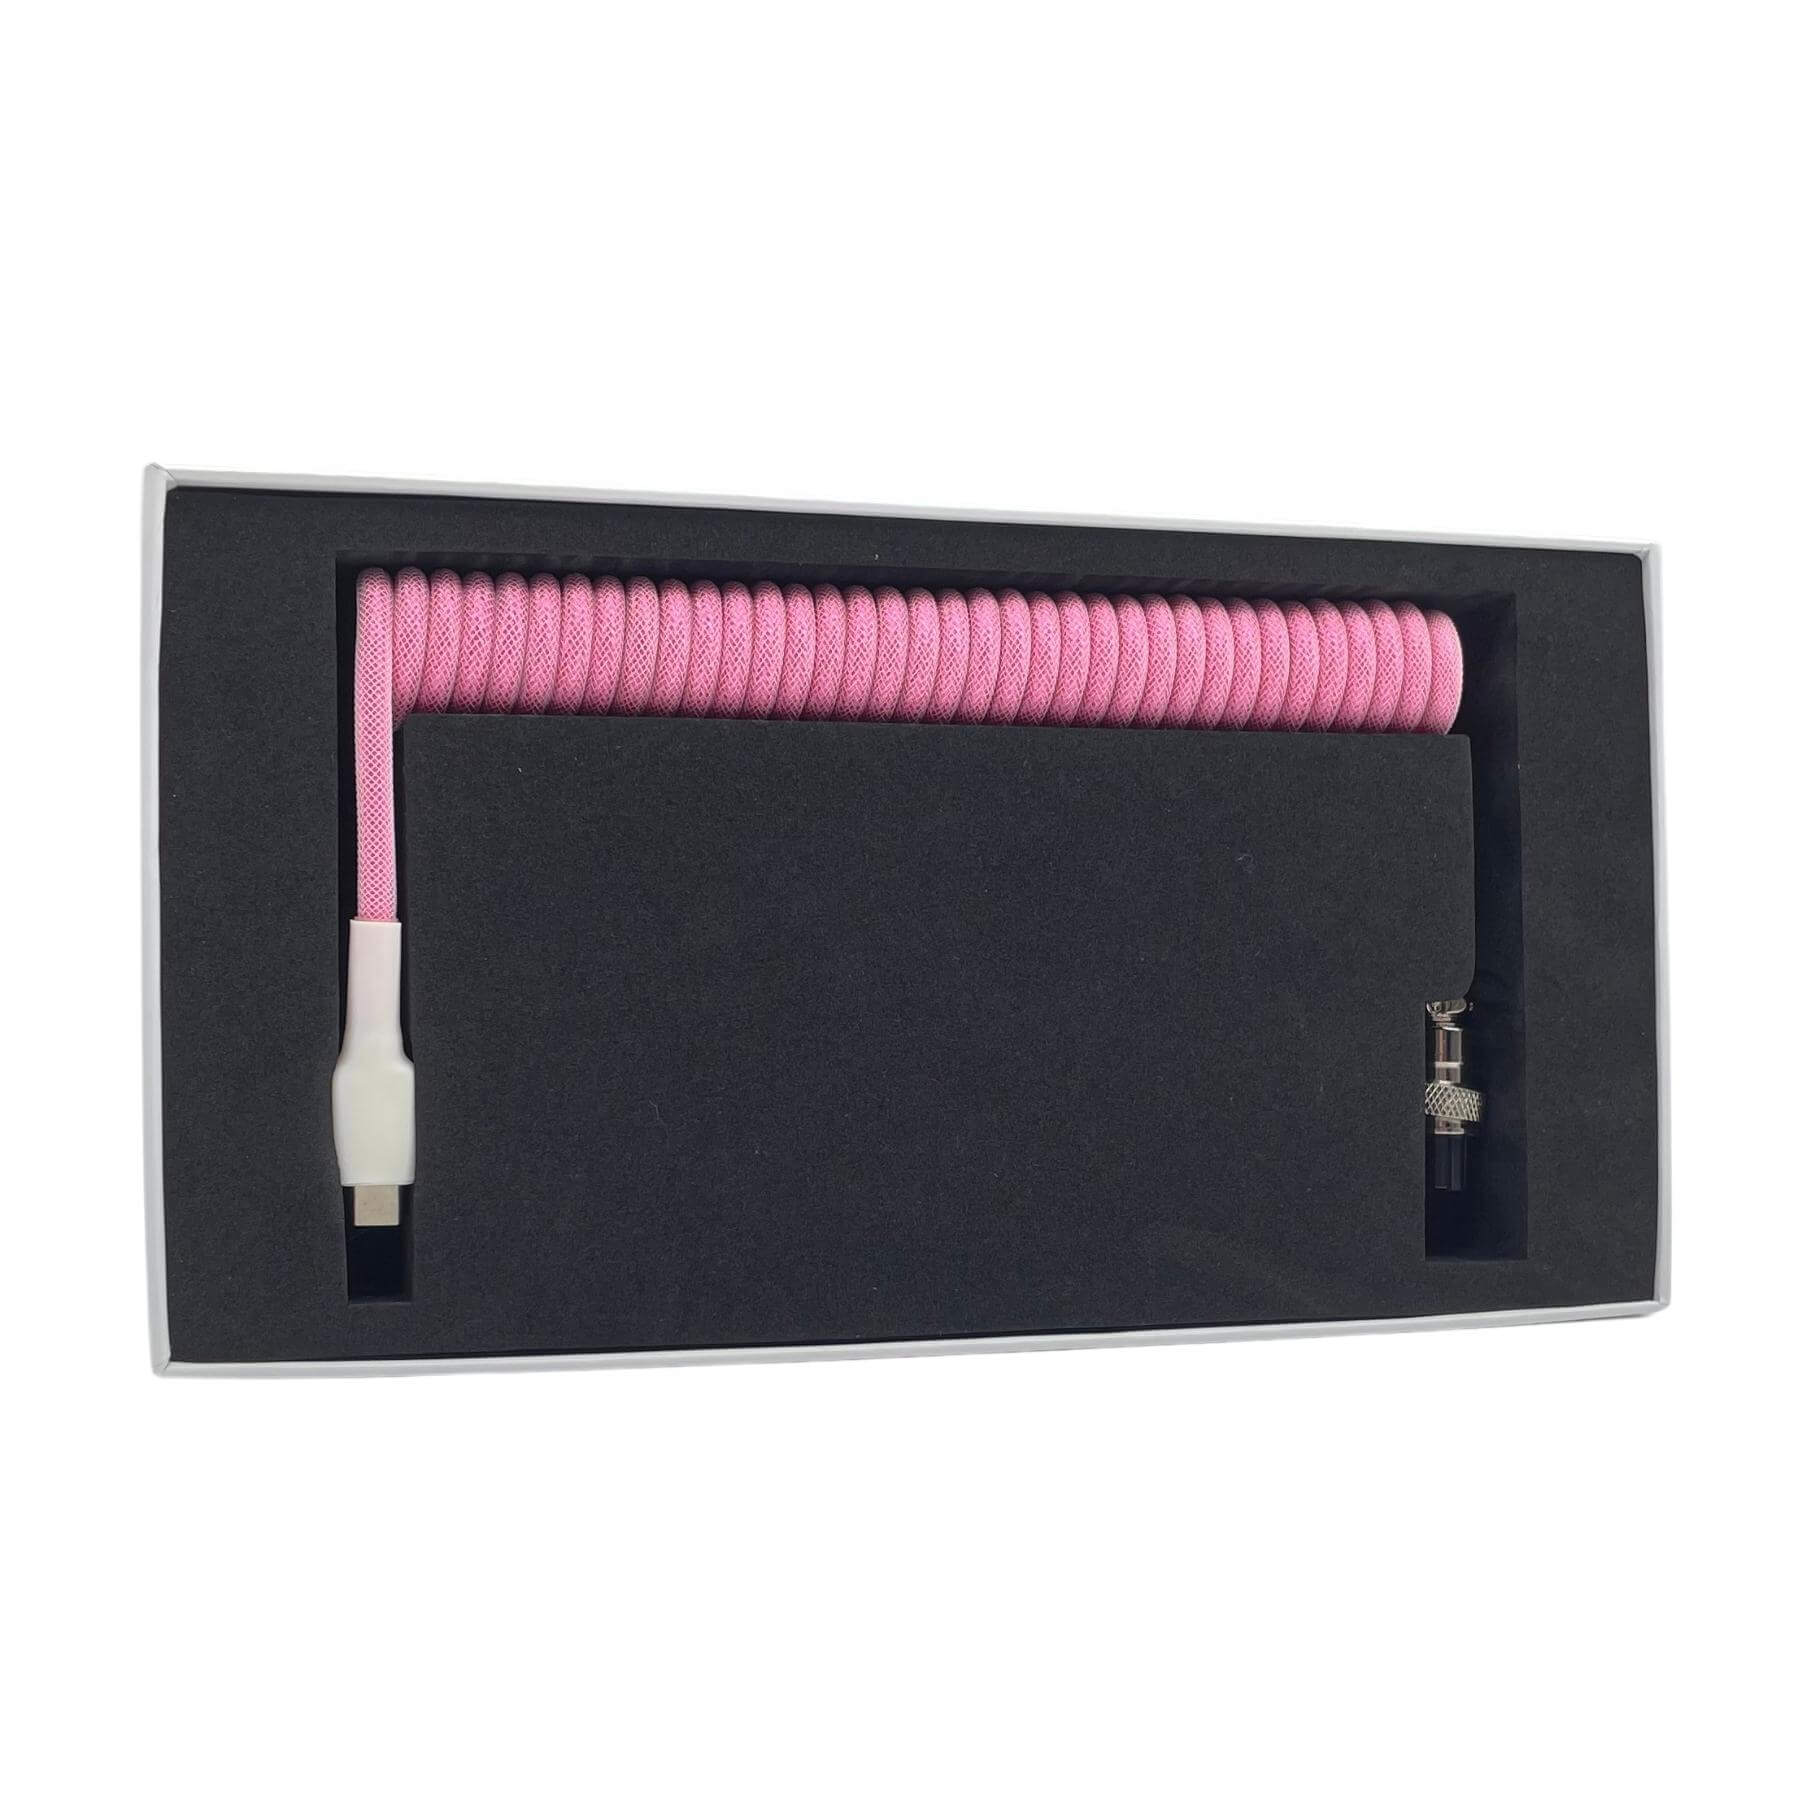 Pink Coiled Cable